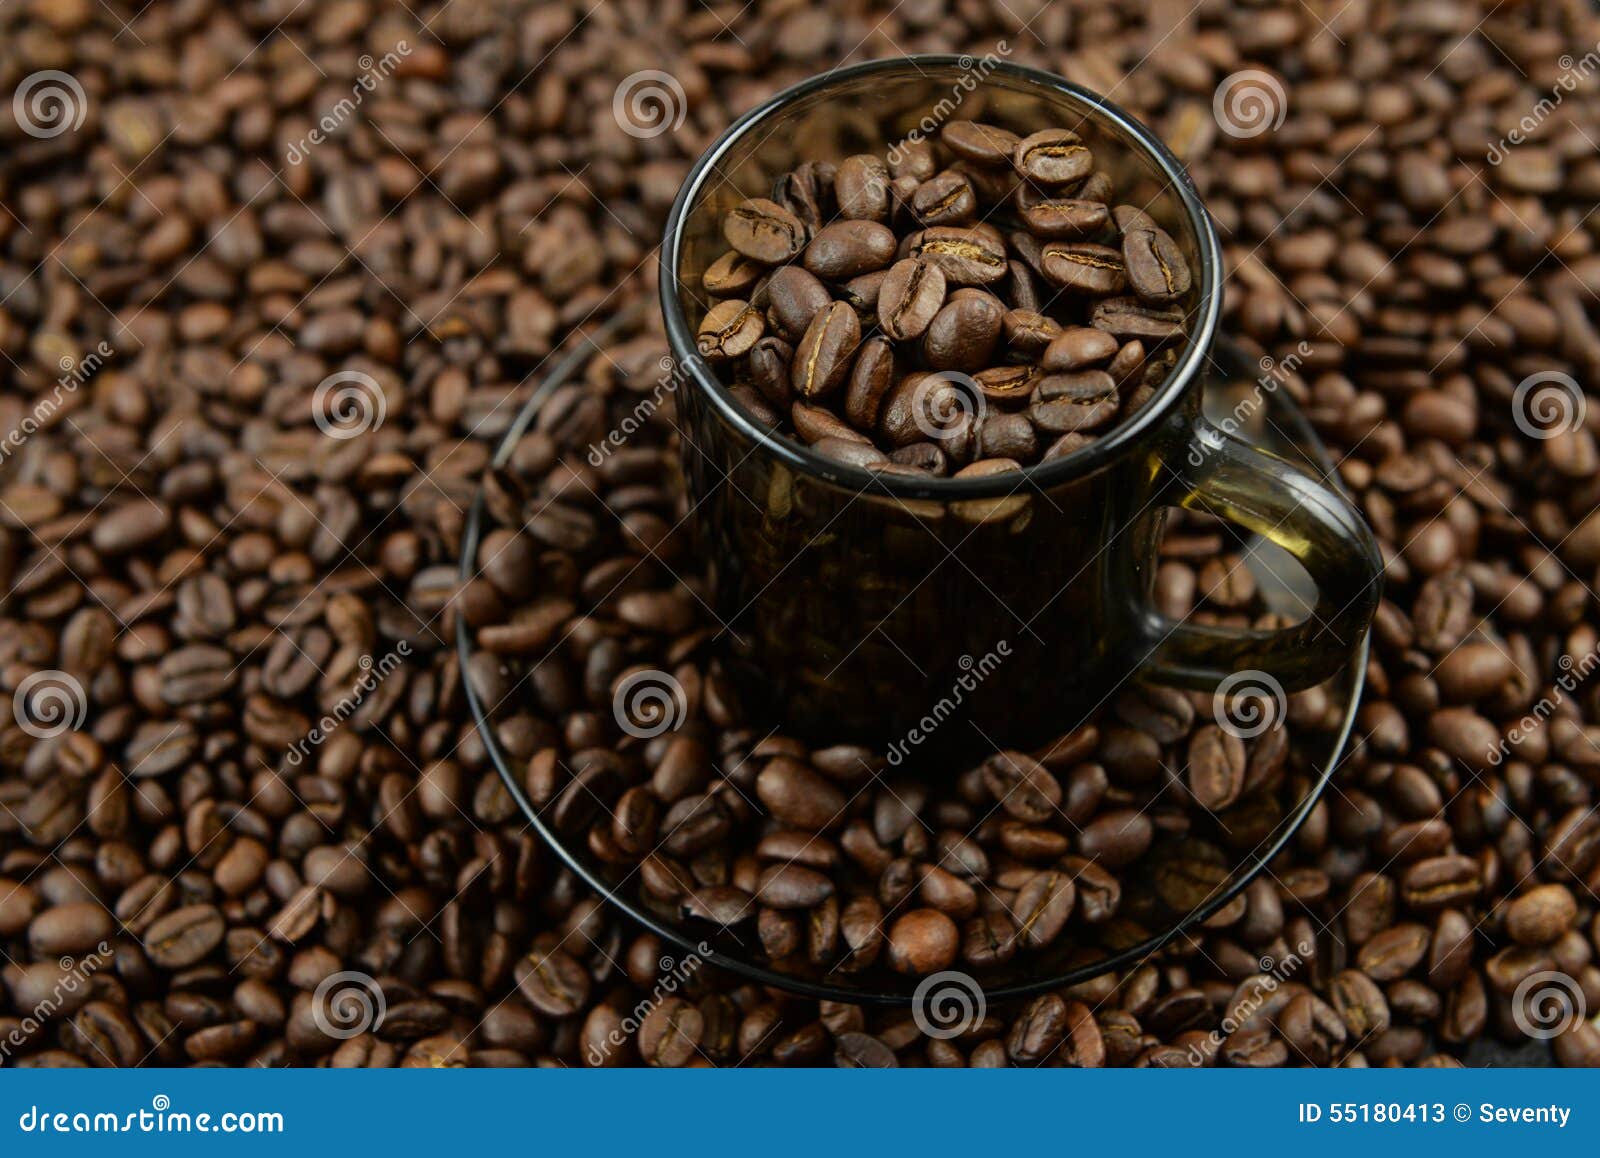 coffee set filled with coffee beans